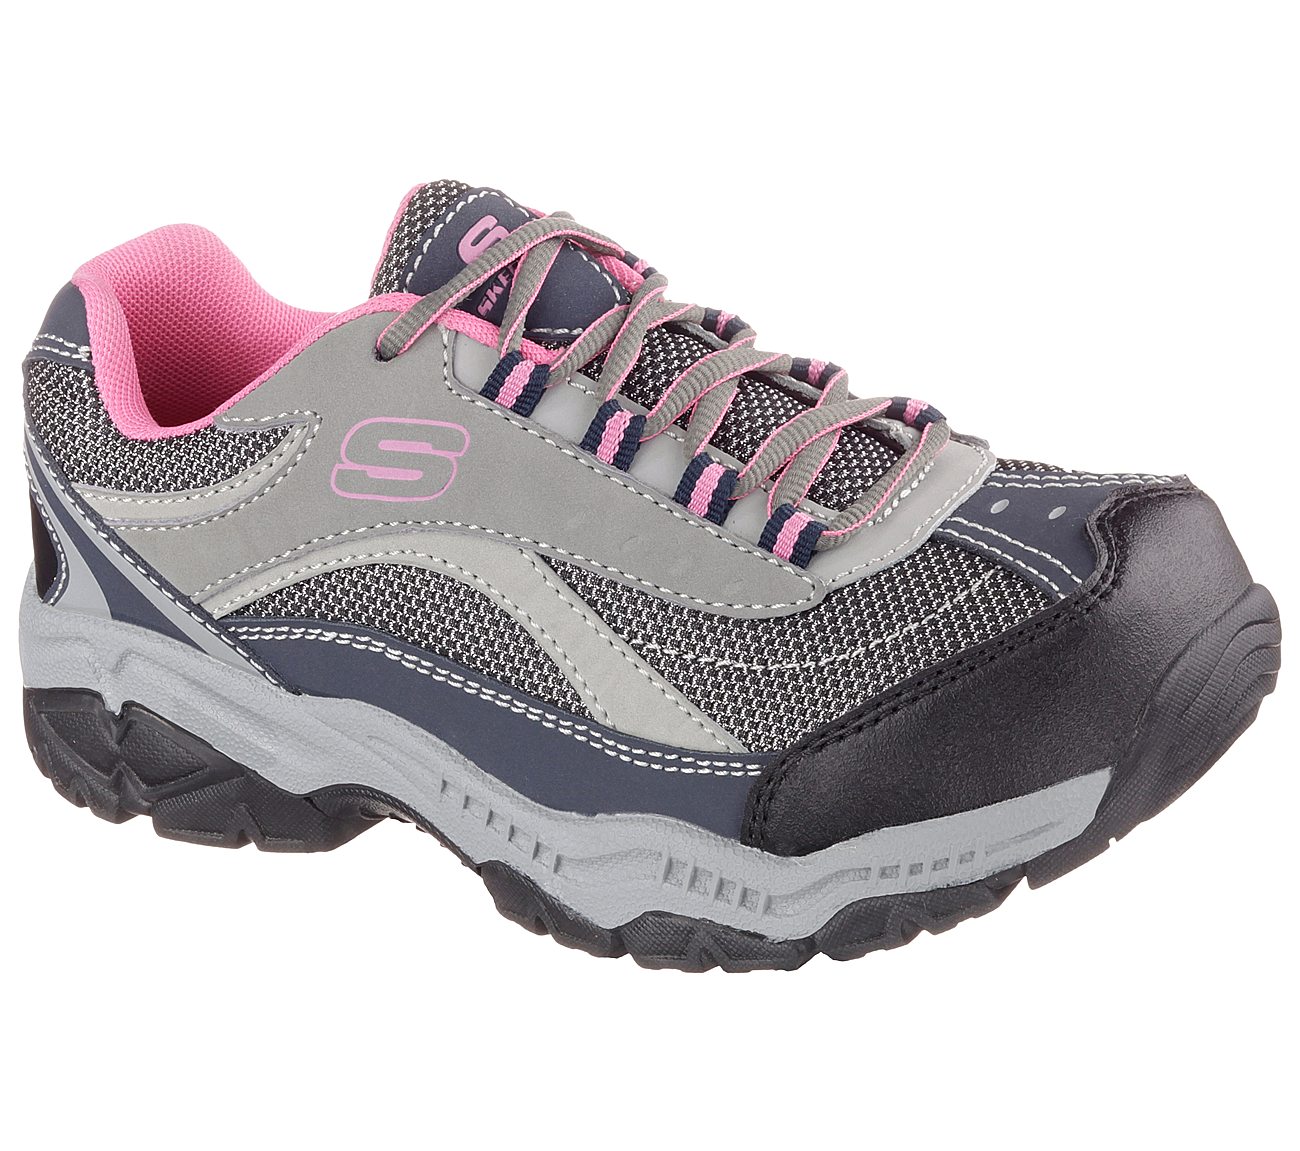 Buy SKECHERS Work Relaxed Fit: Doyline ST Work Shoes